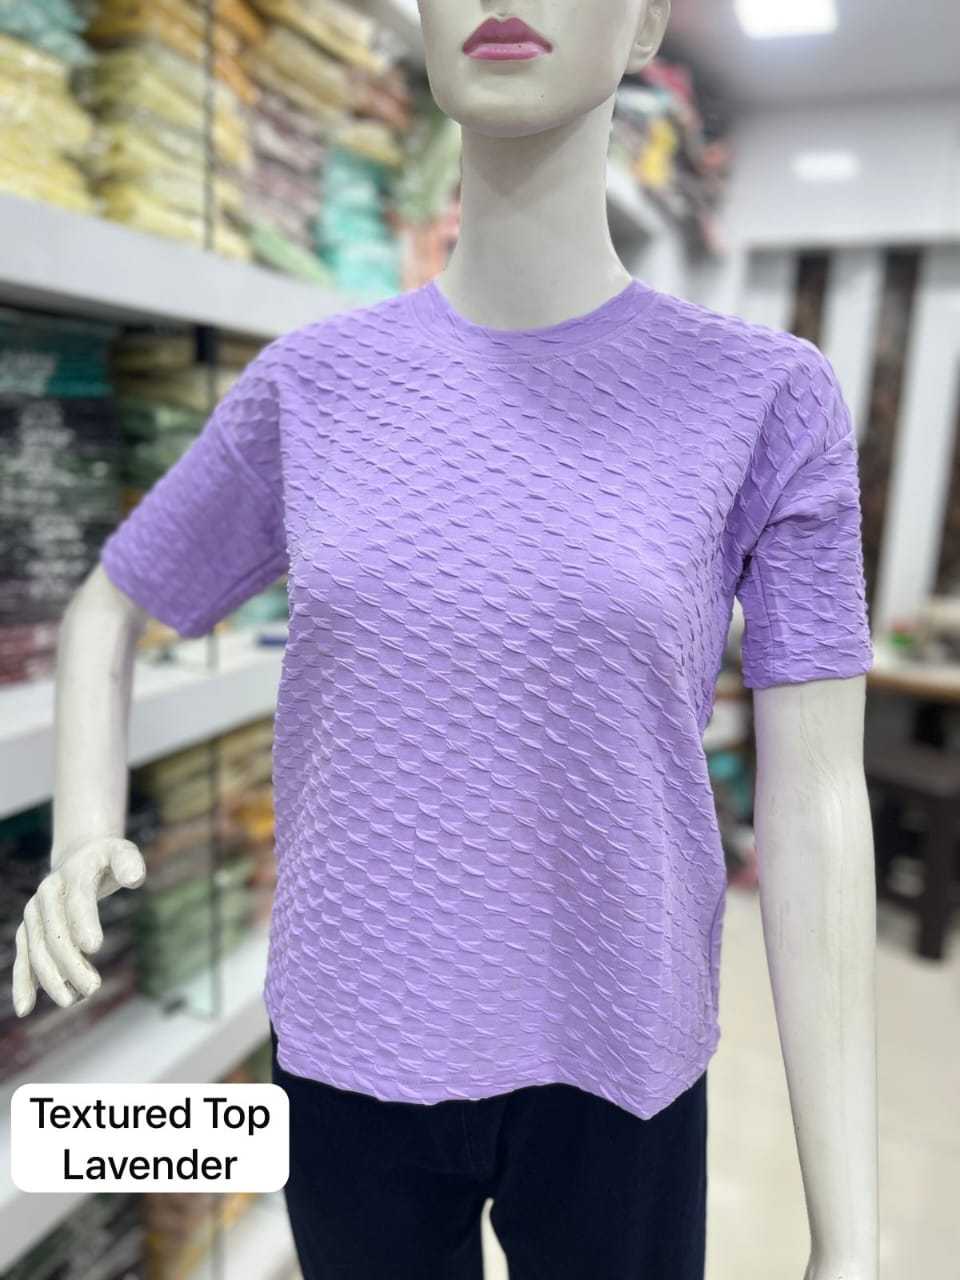 pr textured tshirts fancy imported soft drop shoulder readymade ladies tops